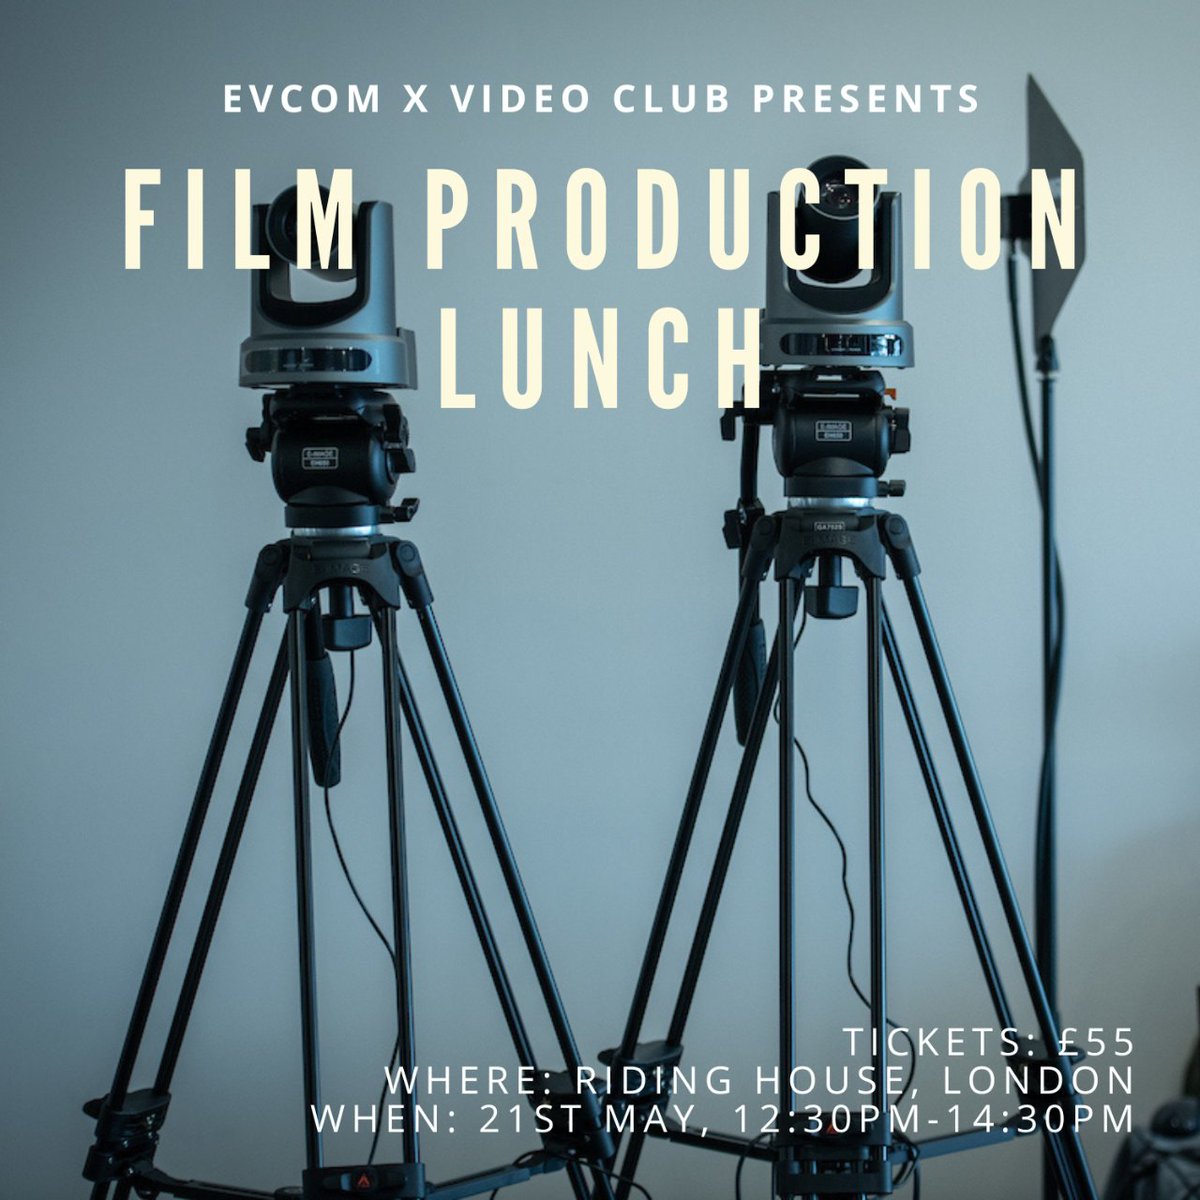 We are delighted to be bringing back the EVCOM Film Production Lunches, a chance for filmmakers in the brand and corporate film industries to come together to discuss key issues and opportunities in the sector over a delicious three course lunch. Book: cvent.me/3KgABK